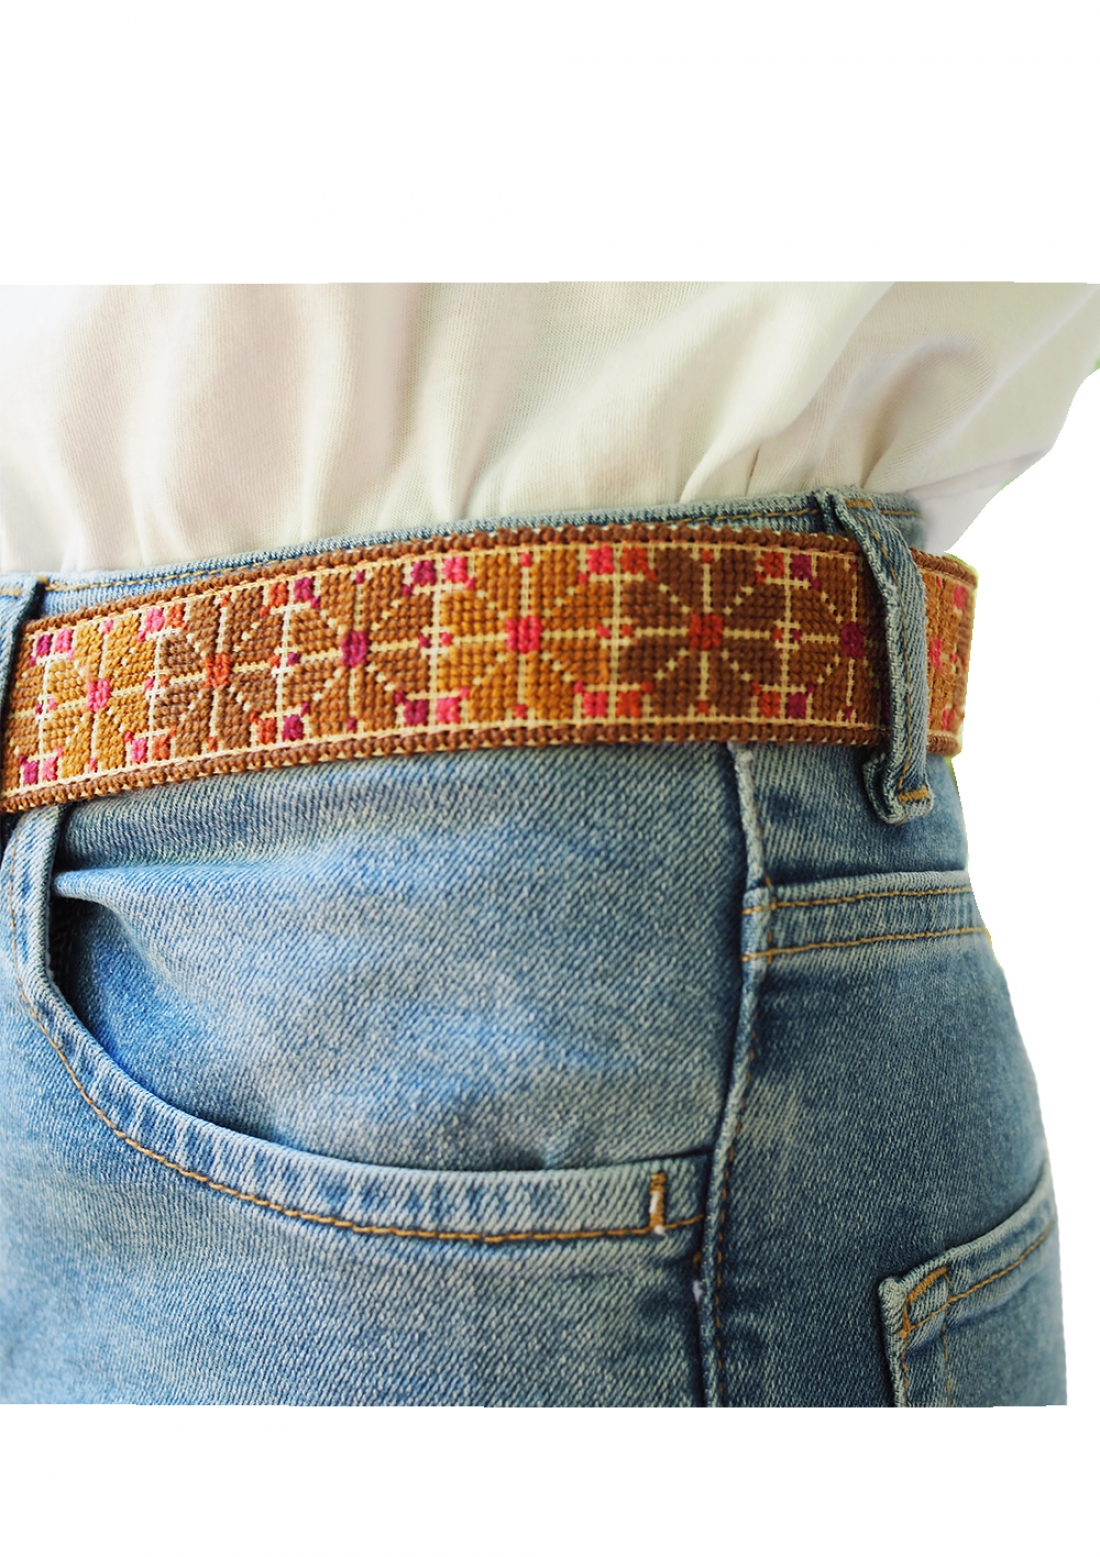 Floral Hand Embroidered leather finish belt 